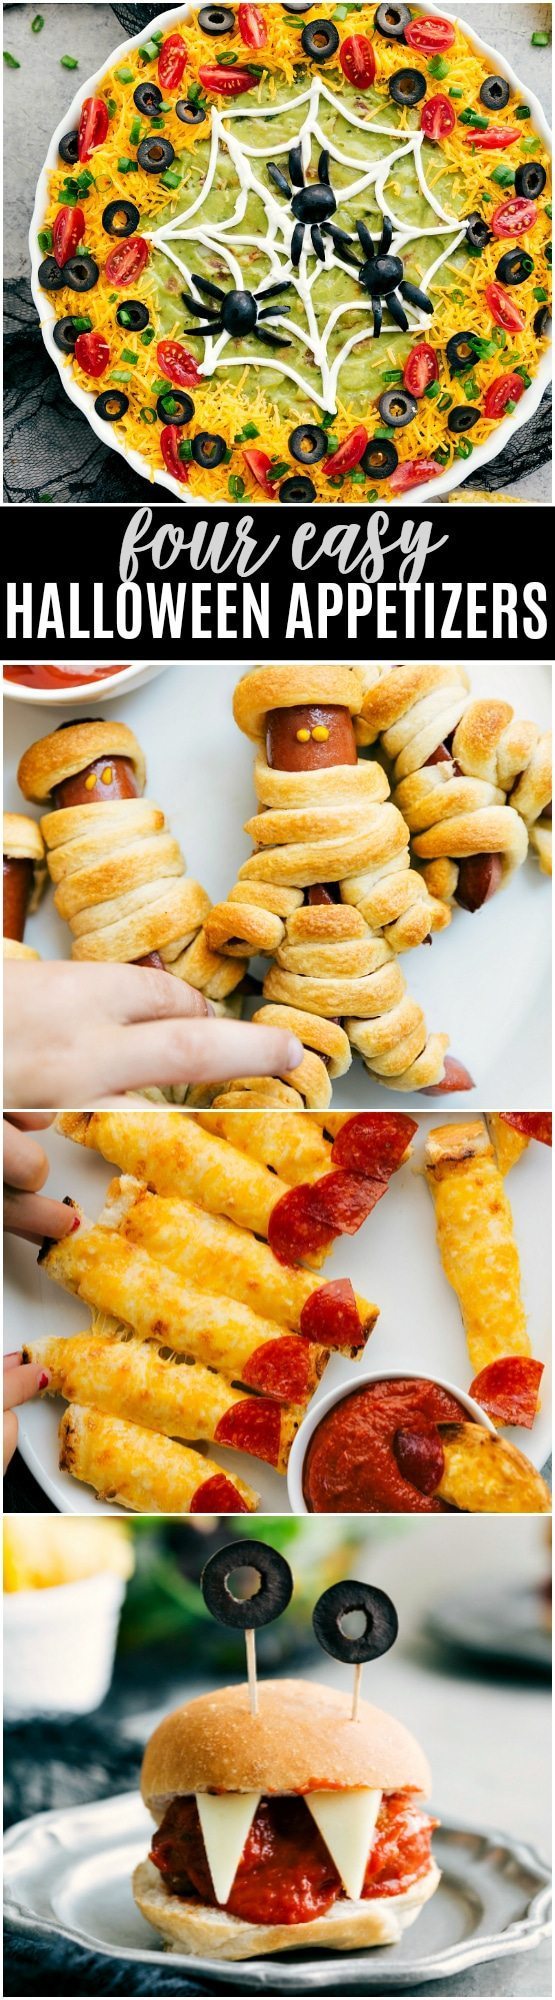 Four easy, & creative Halloween appetizers that are so delicious -- Spiderweb 7-Layer Dip, Walking Dead Mummy Dogs, Monster Meatball Sliders, & Cheesy Monster Fingernail Bread. via chelseasmessyapron.com